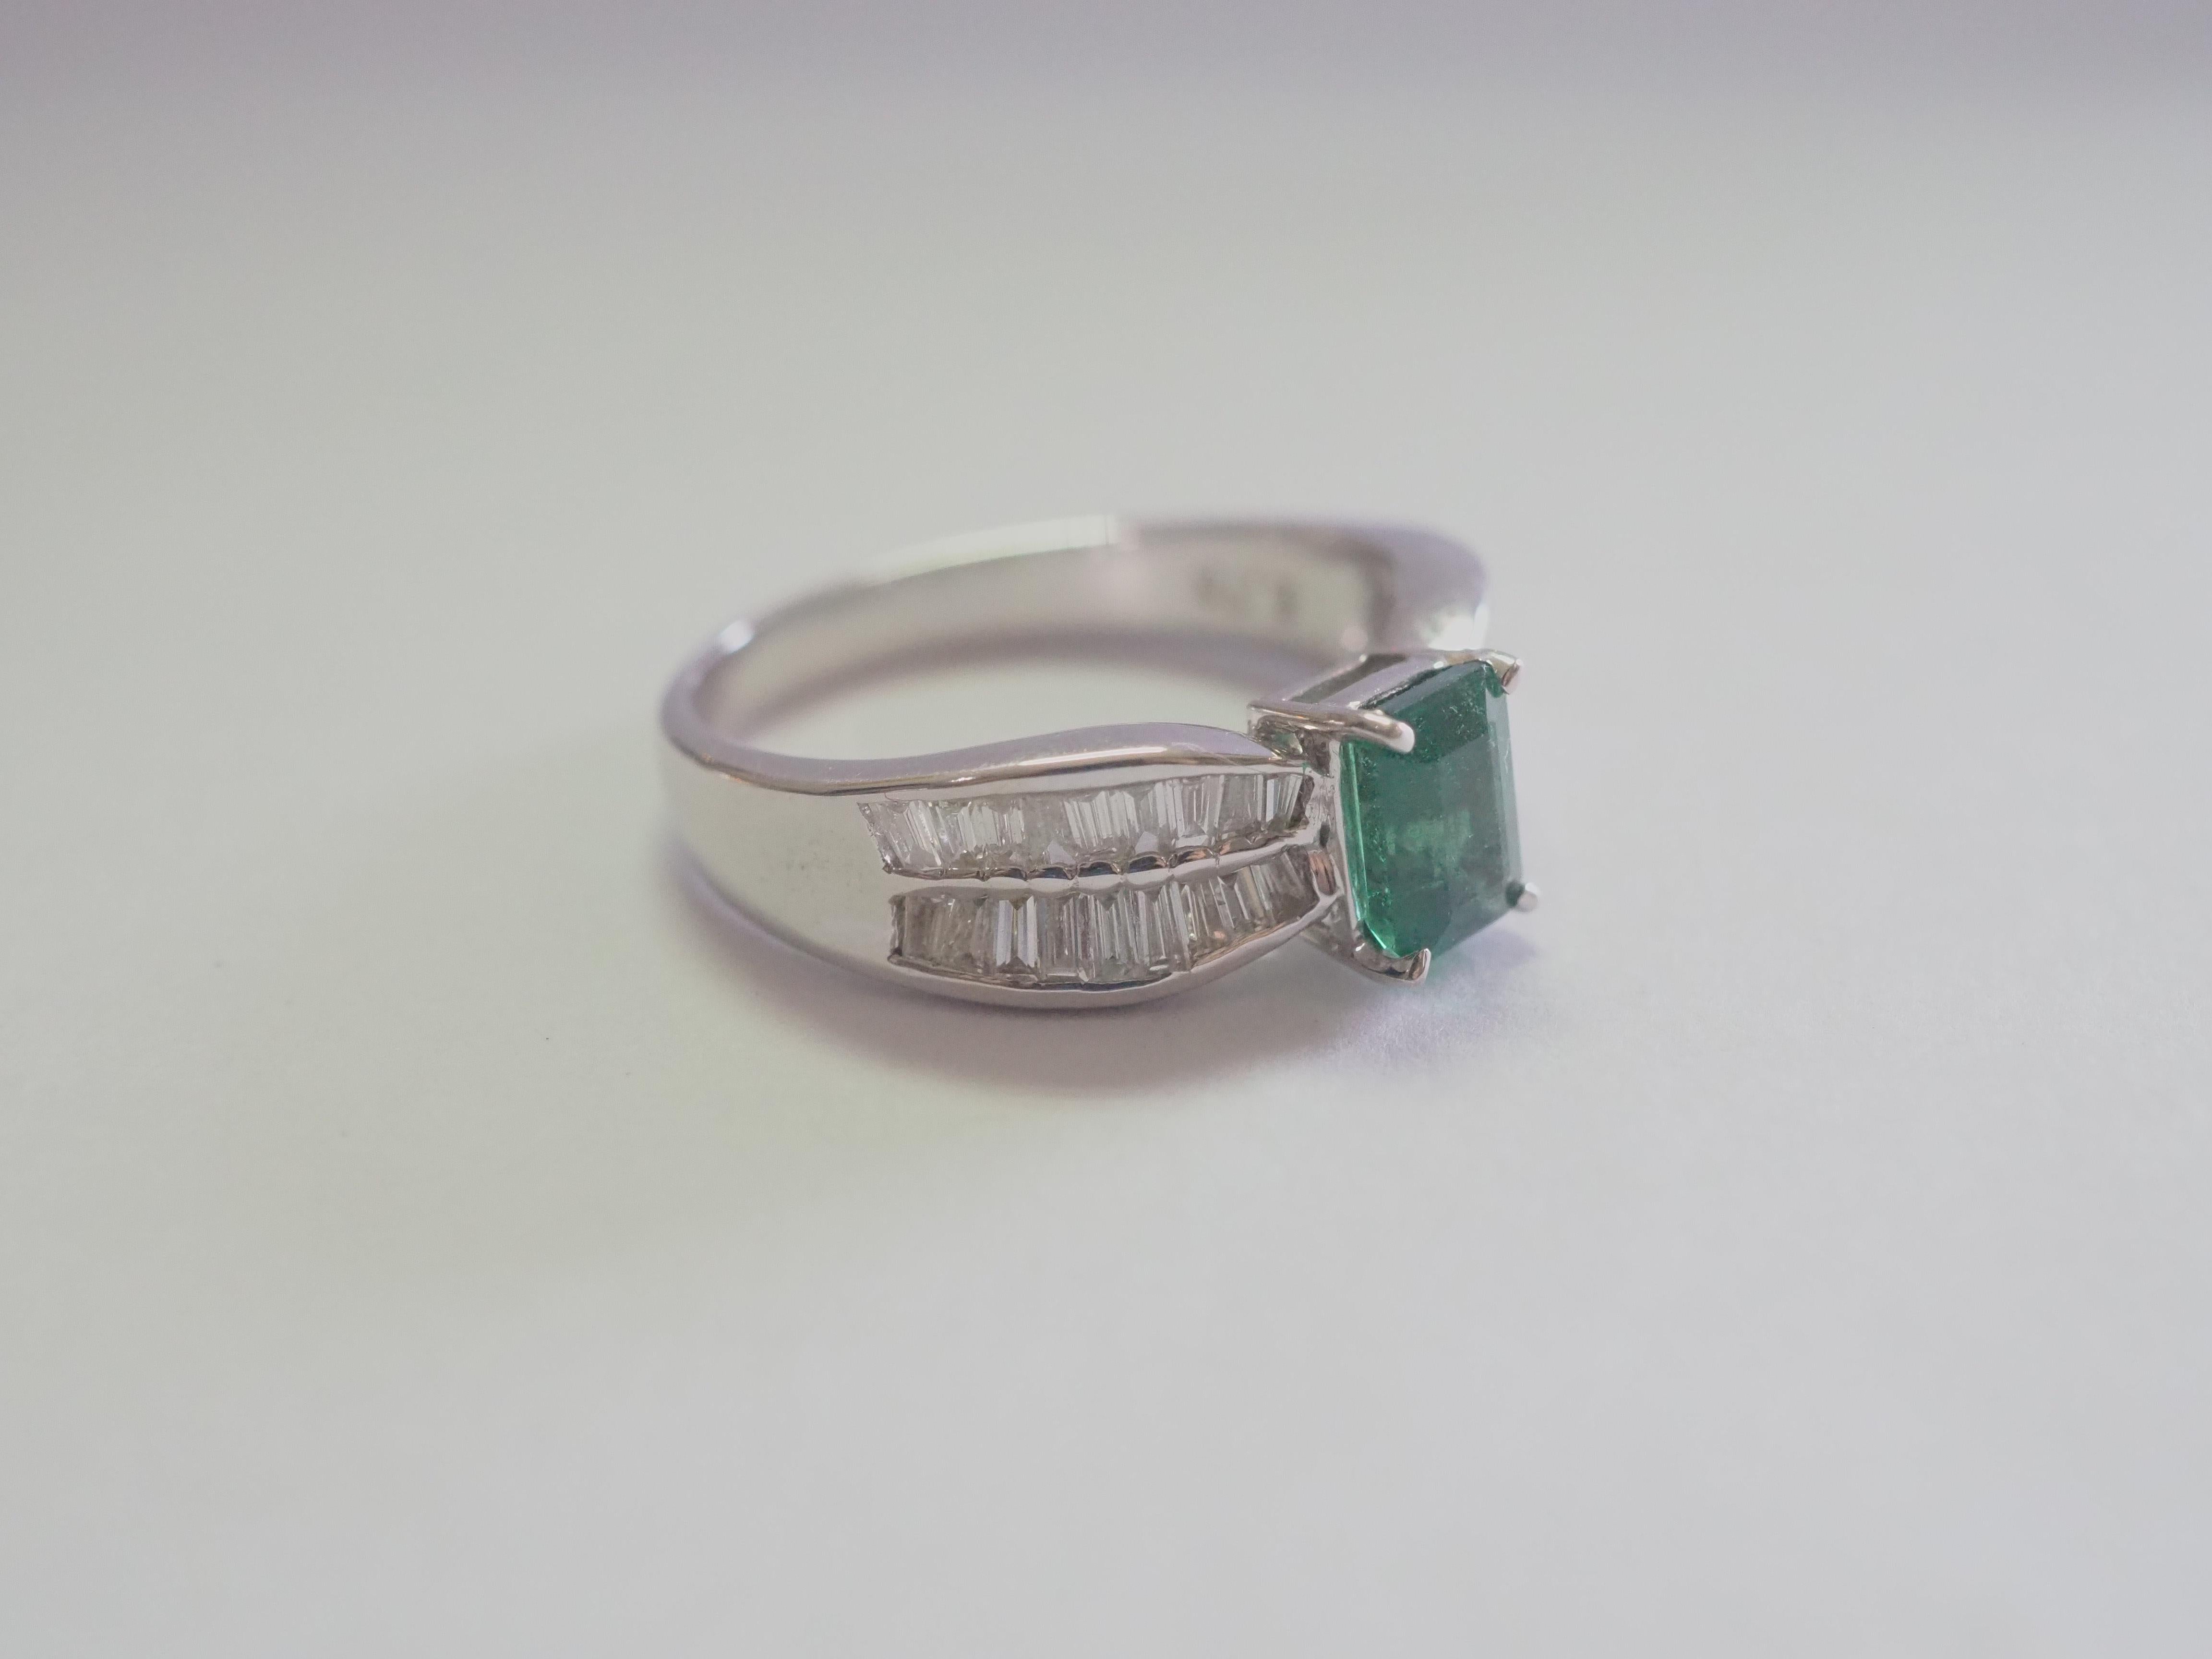 Emerald Cut ICA 18k White Gold 0.73ct Insignificant Emerald & 0.53ct Diamond Engagement Ring